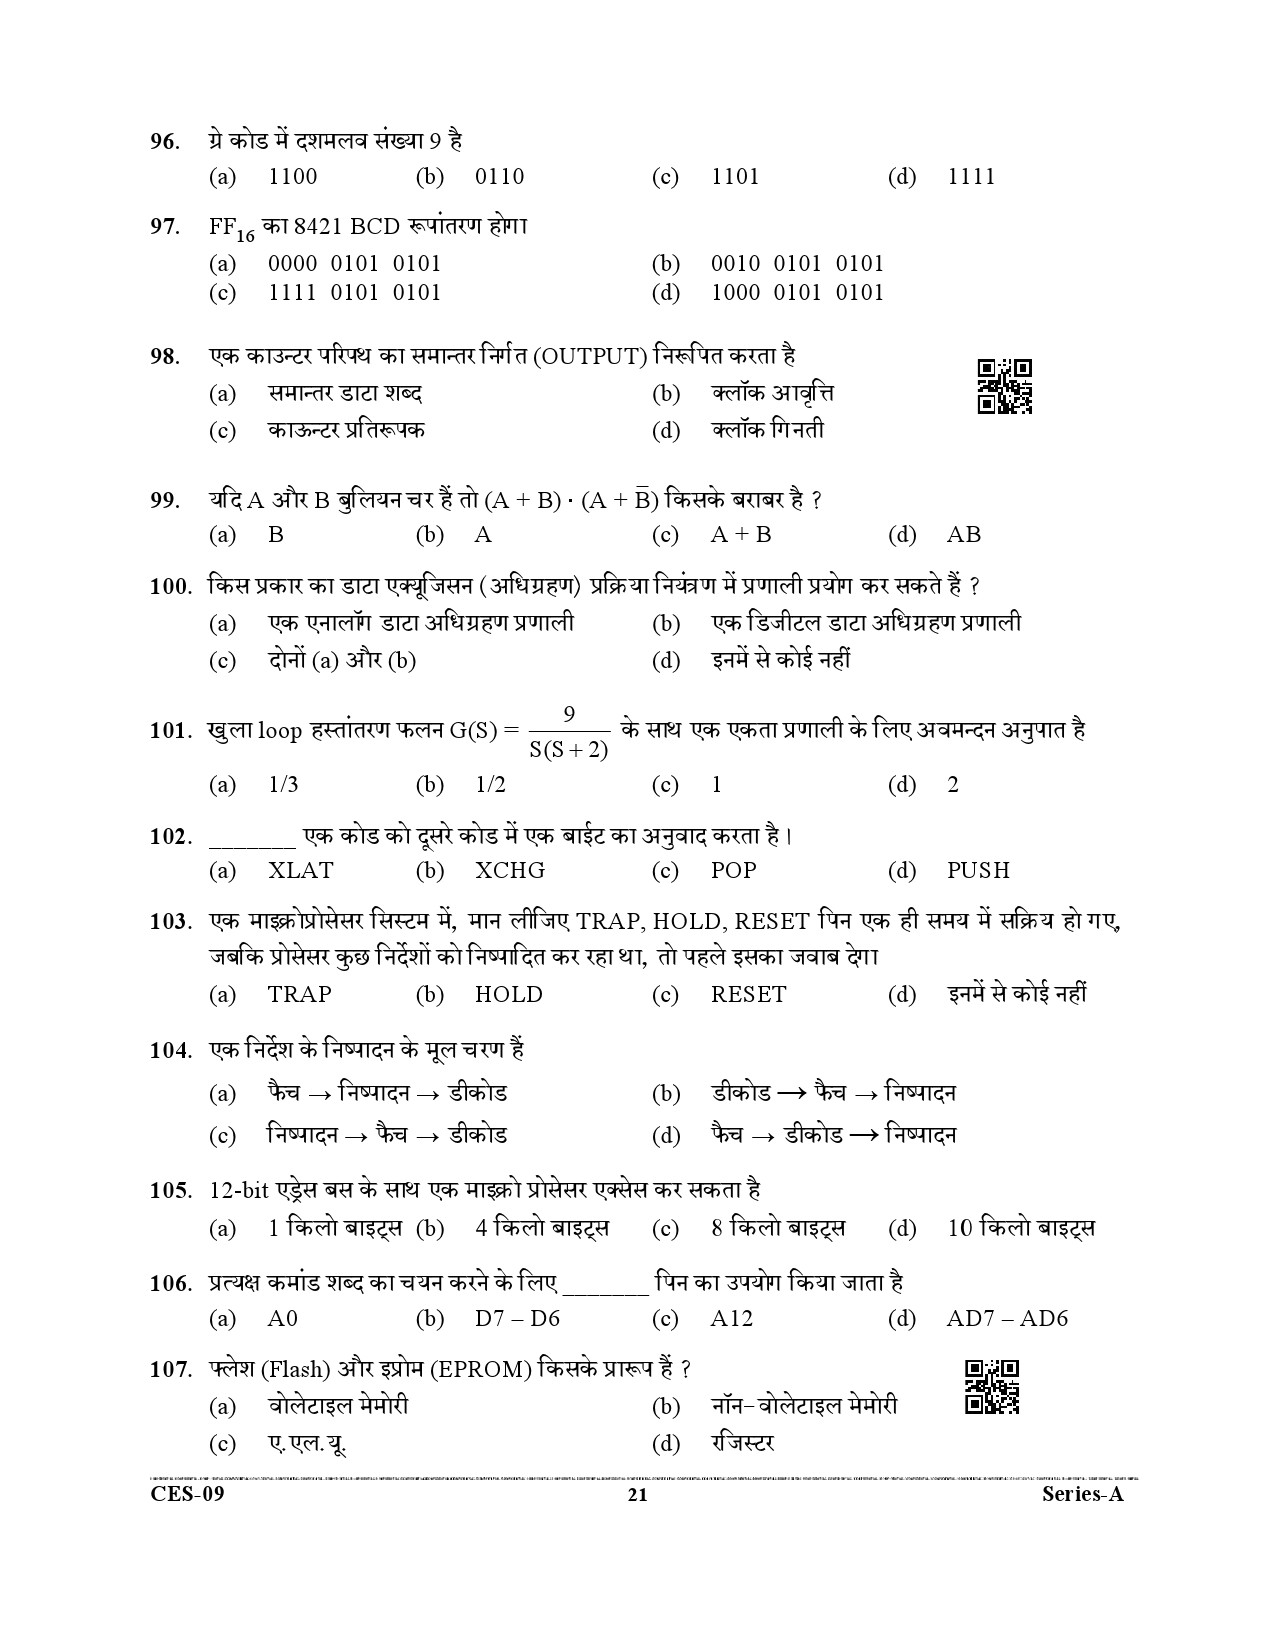 Uttarakhand Combined State Engineering Service Exam 2021 Electrical Engineering Paper II 21